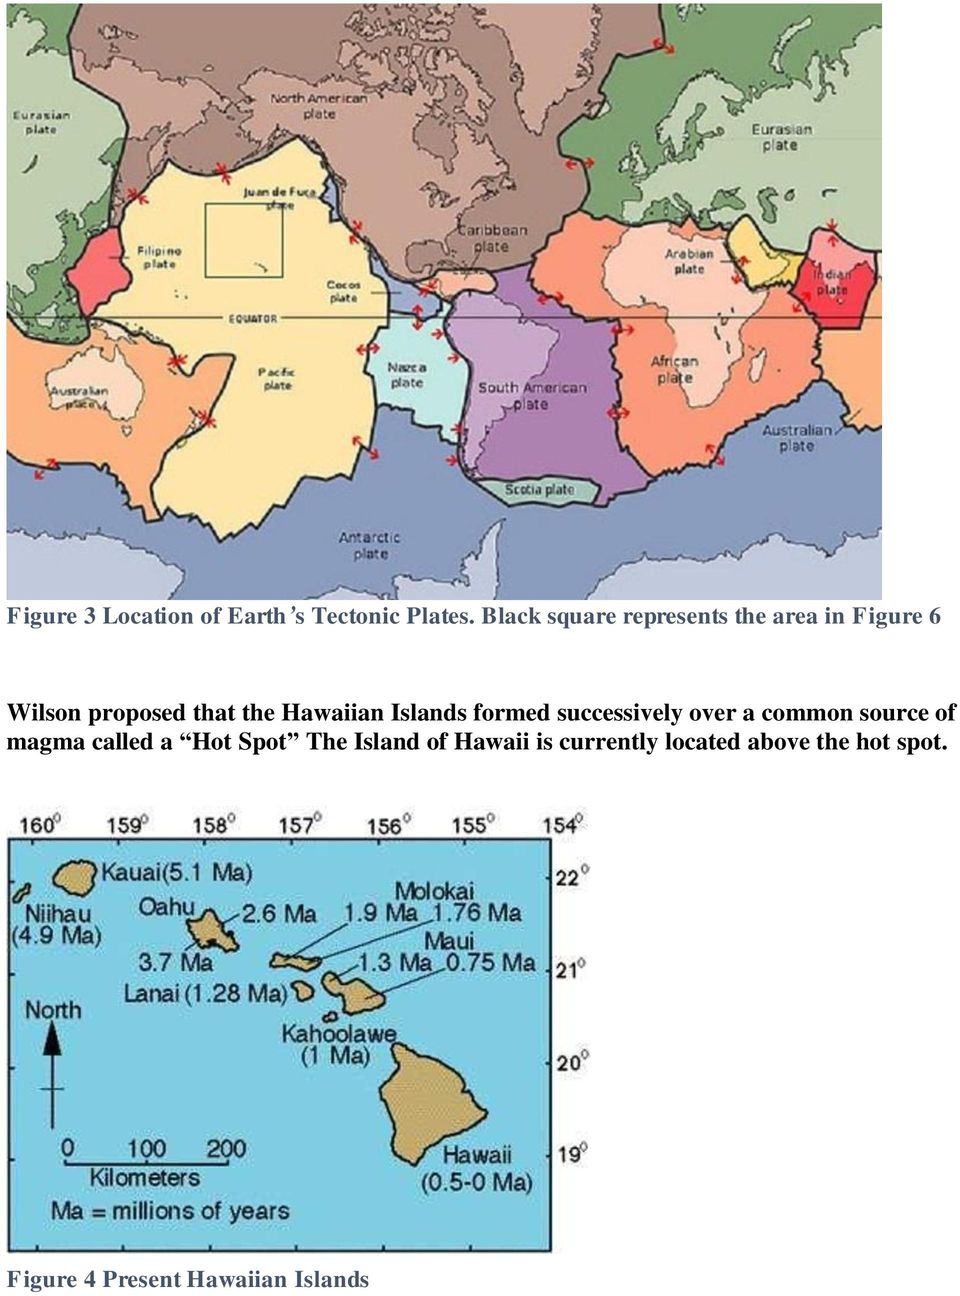 Hawaiian Islands formed successively over a common source of magma called